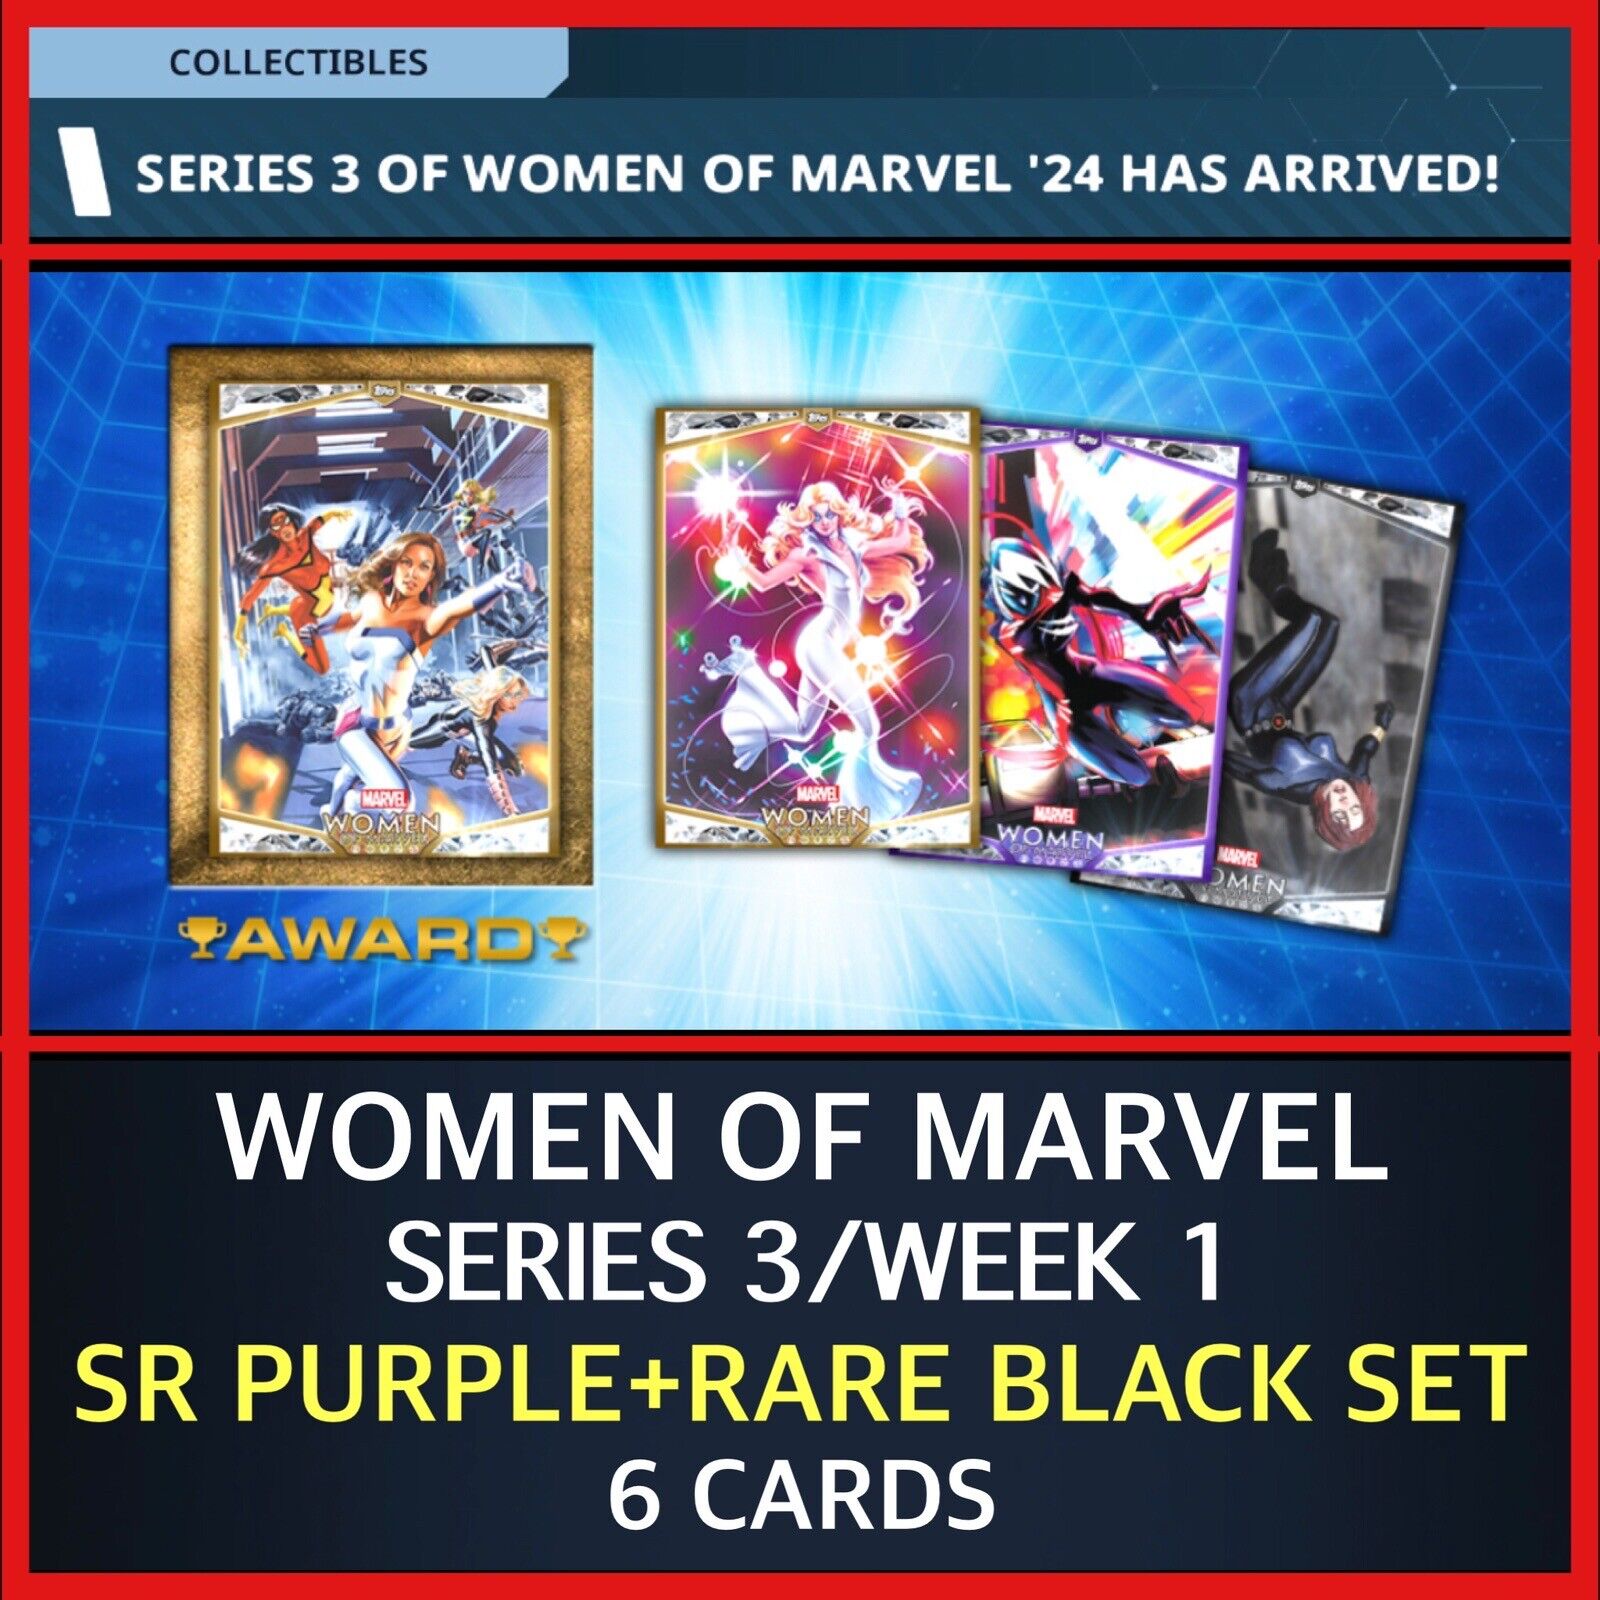 WOMEN OF MARVEL ‘24-SERIES 3/DROP 1 PURPLE+BLACK 6 CARDS-TOPPS MARVEL COLLECT